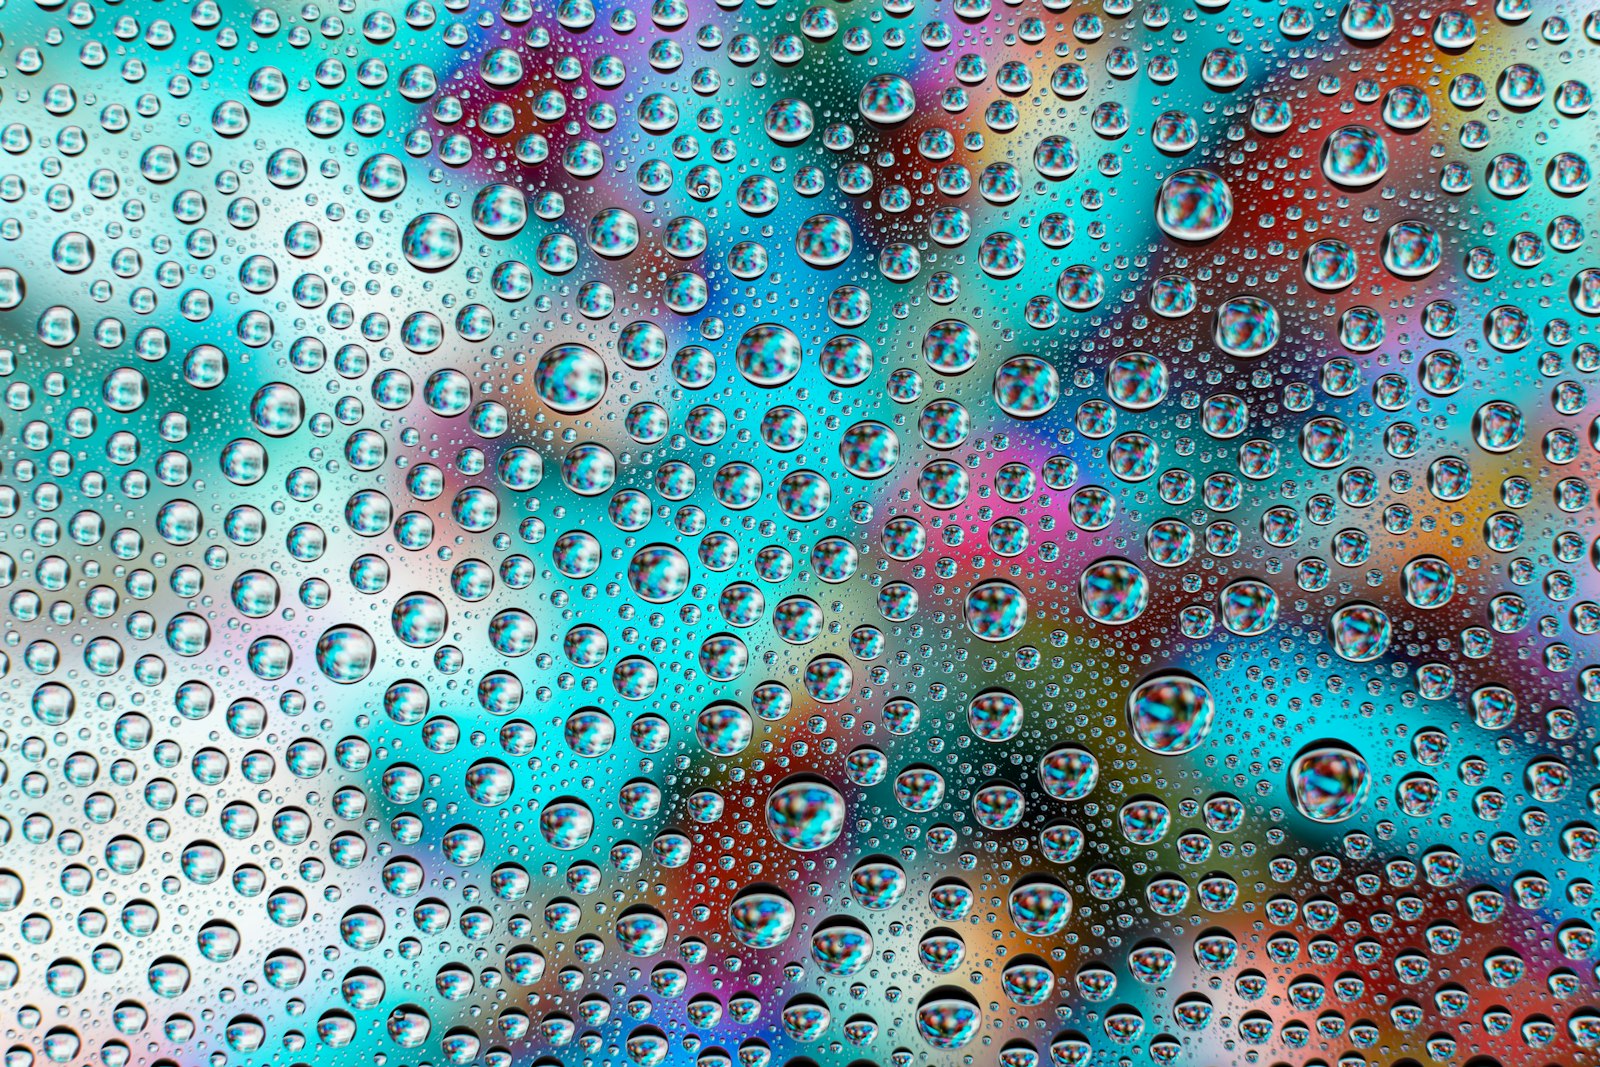 Tamron SP 85mm F1.8 Di VC USD sample photo. Water droplets on glass photography